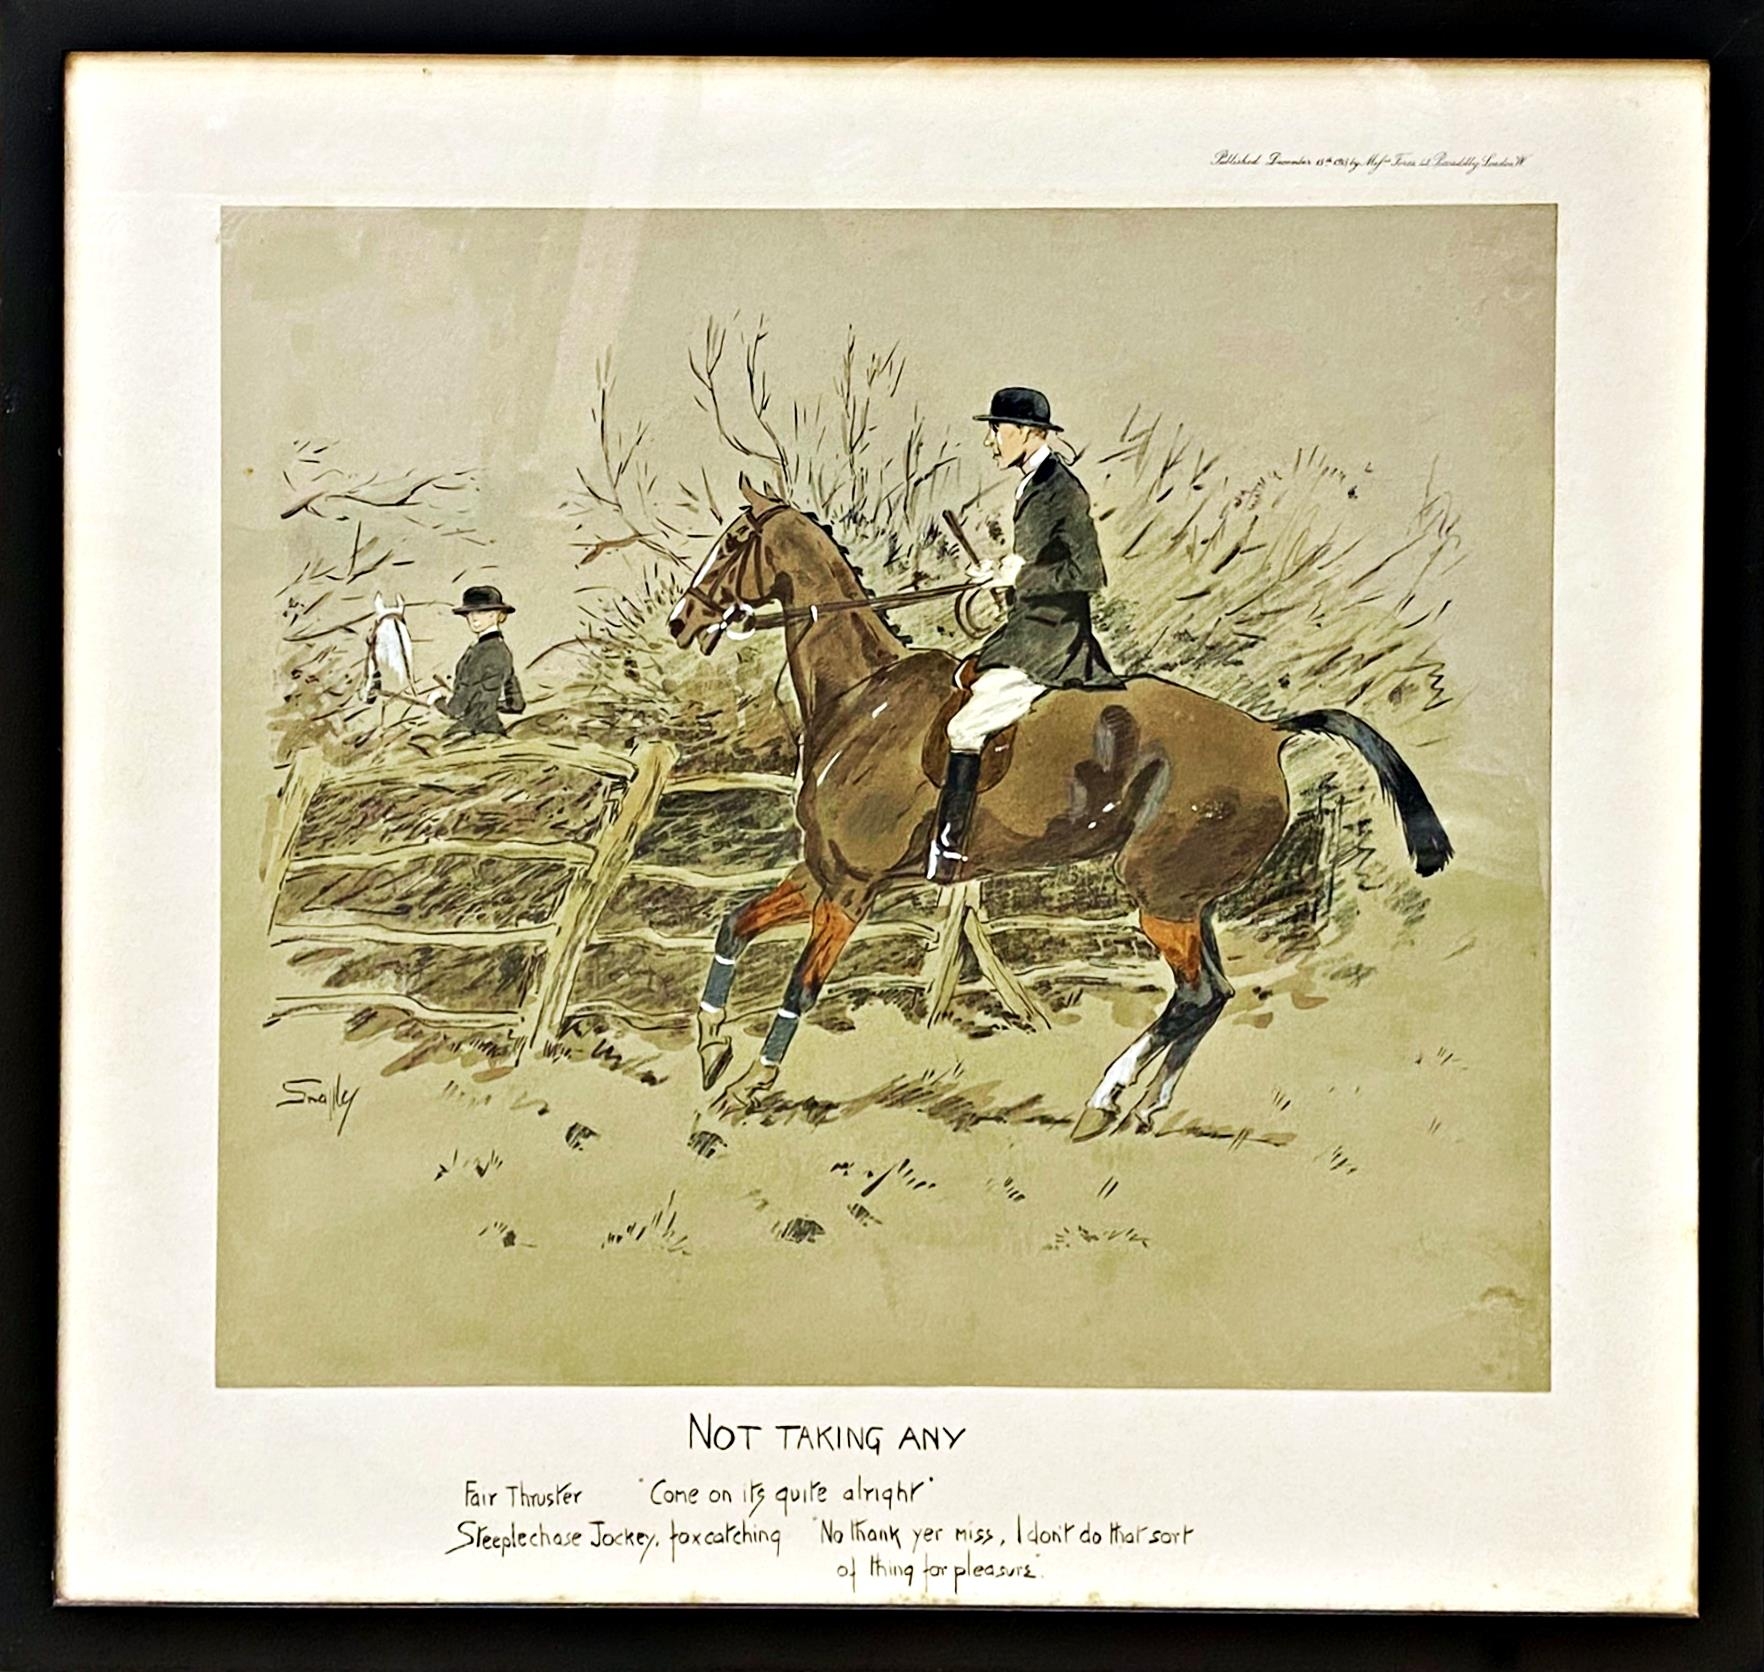 'Snaffles' (Charles Johnson Payne, 1884-1967) - 'Not Taking Any', print with hand coloured - Image 2 of 2